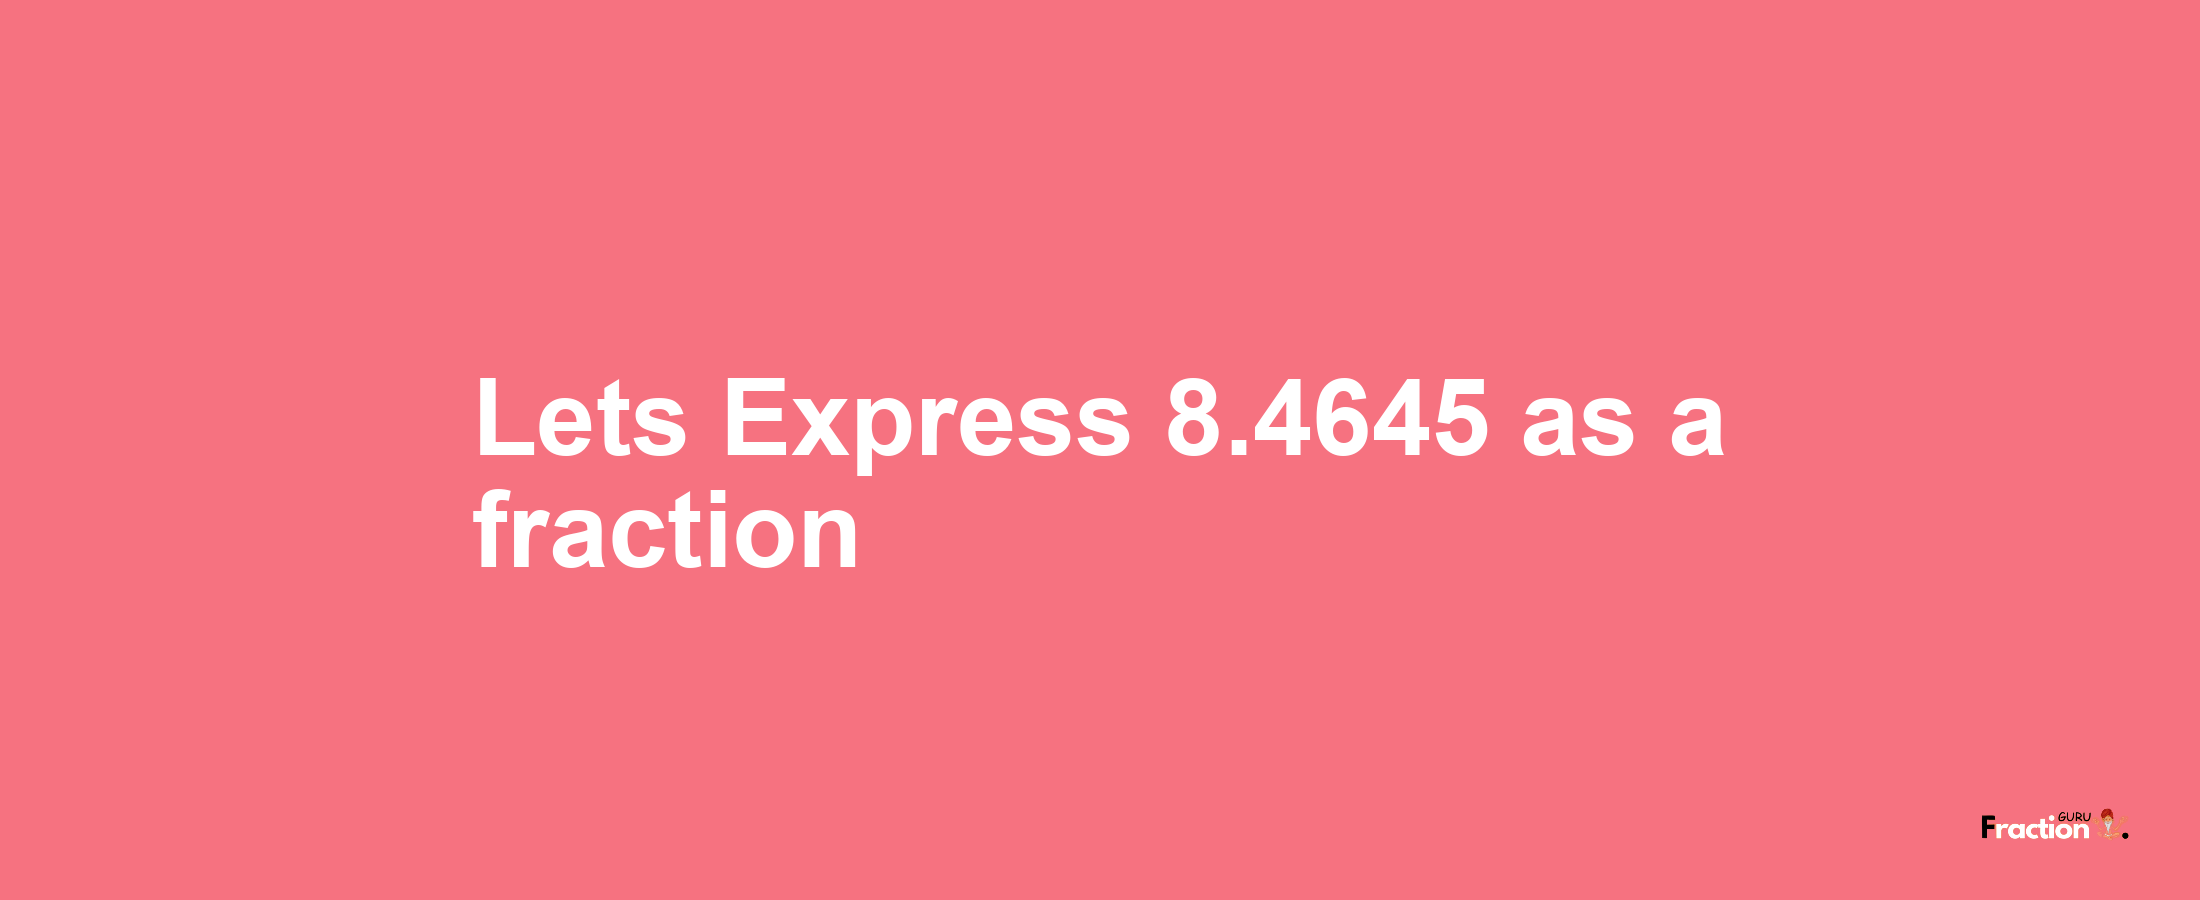 Lets Express 8.4645 as afraction